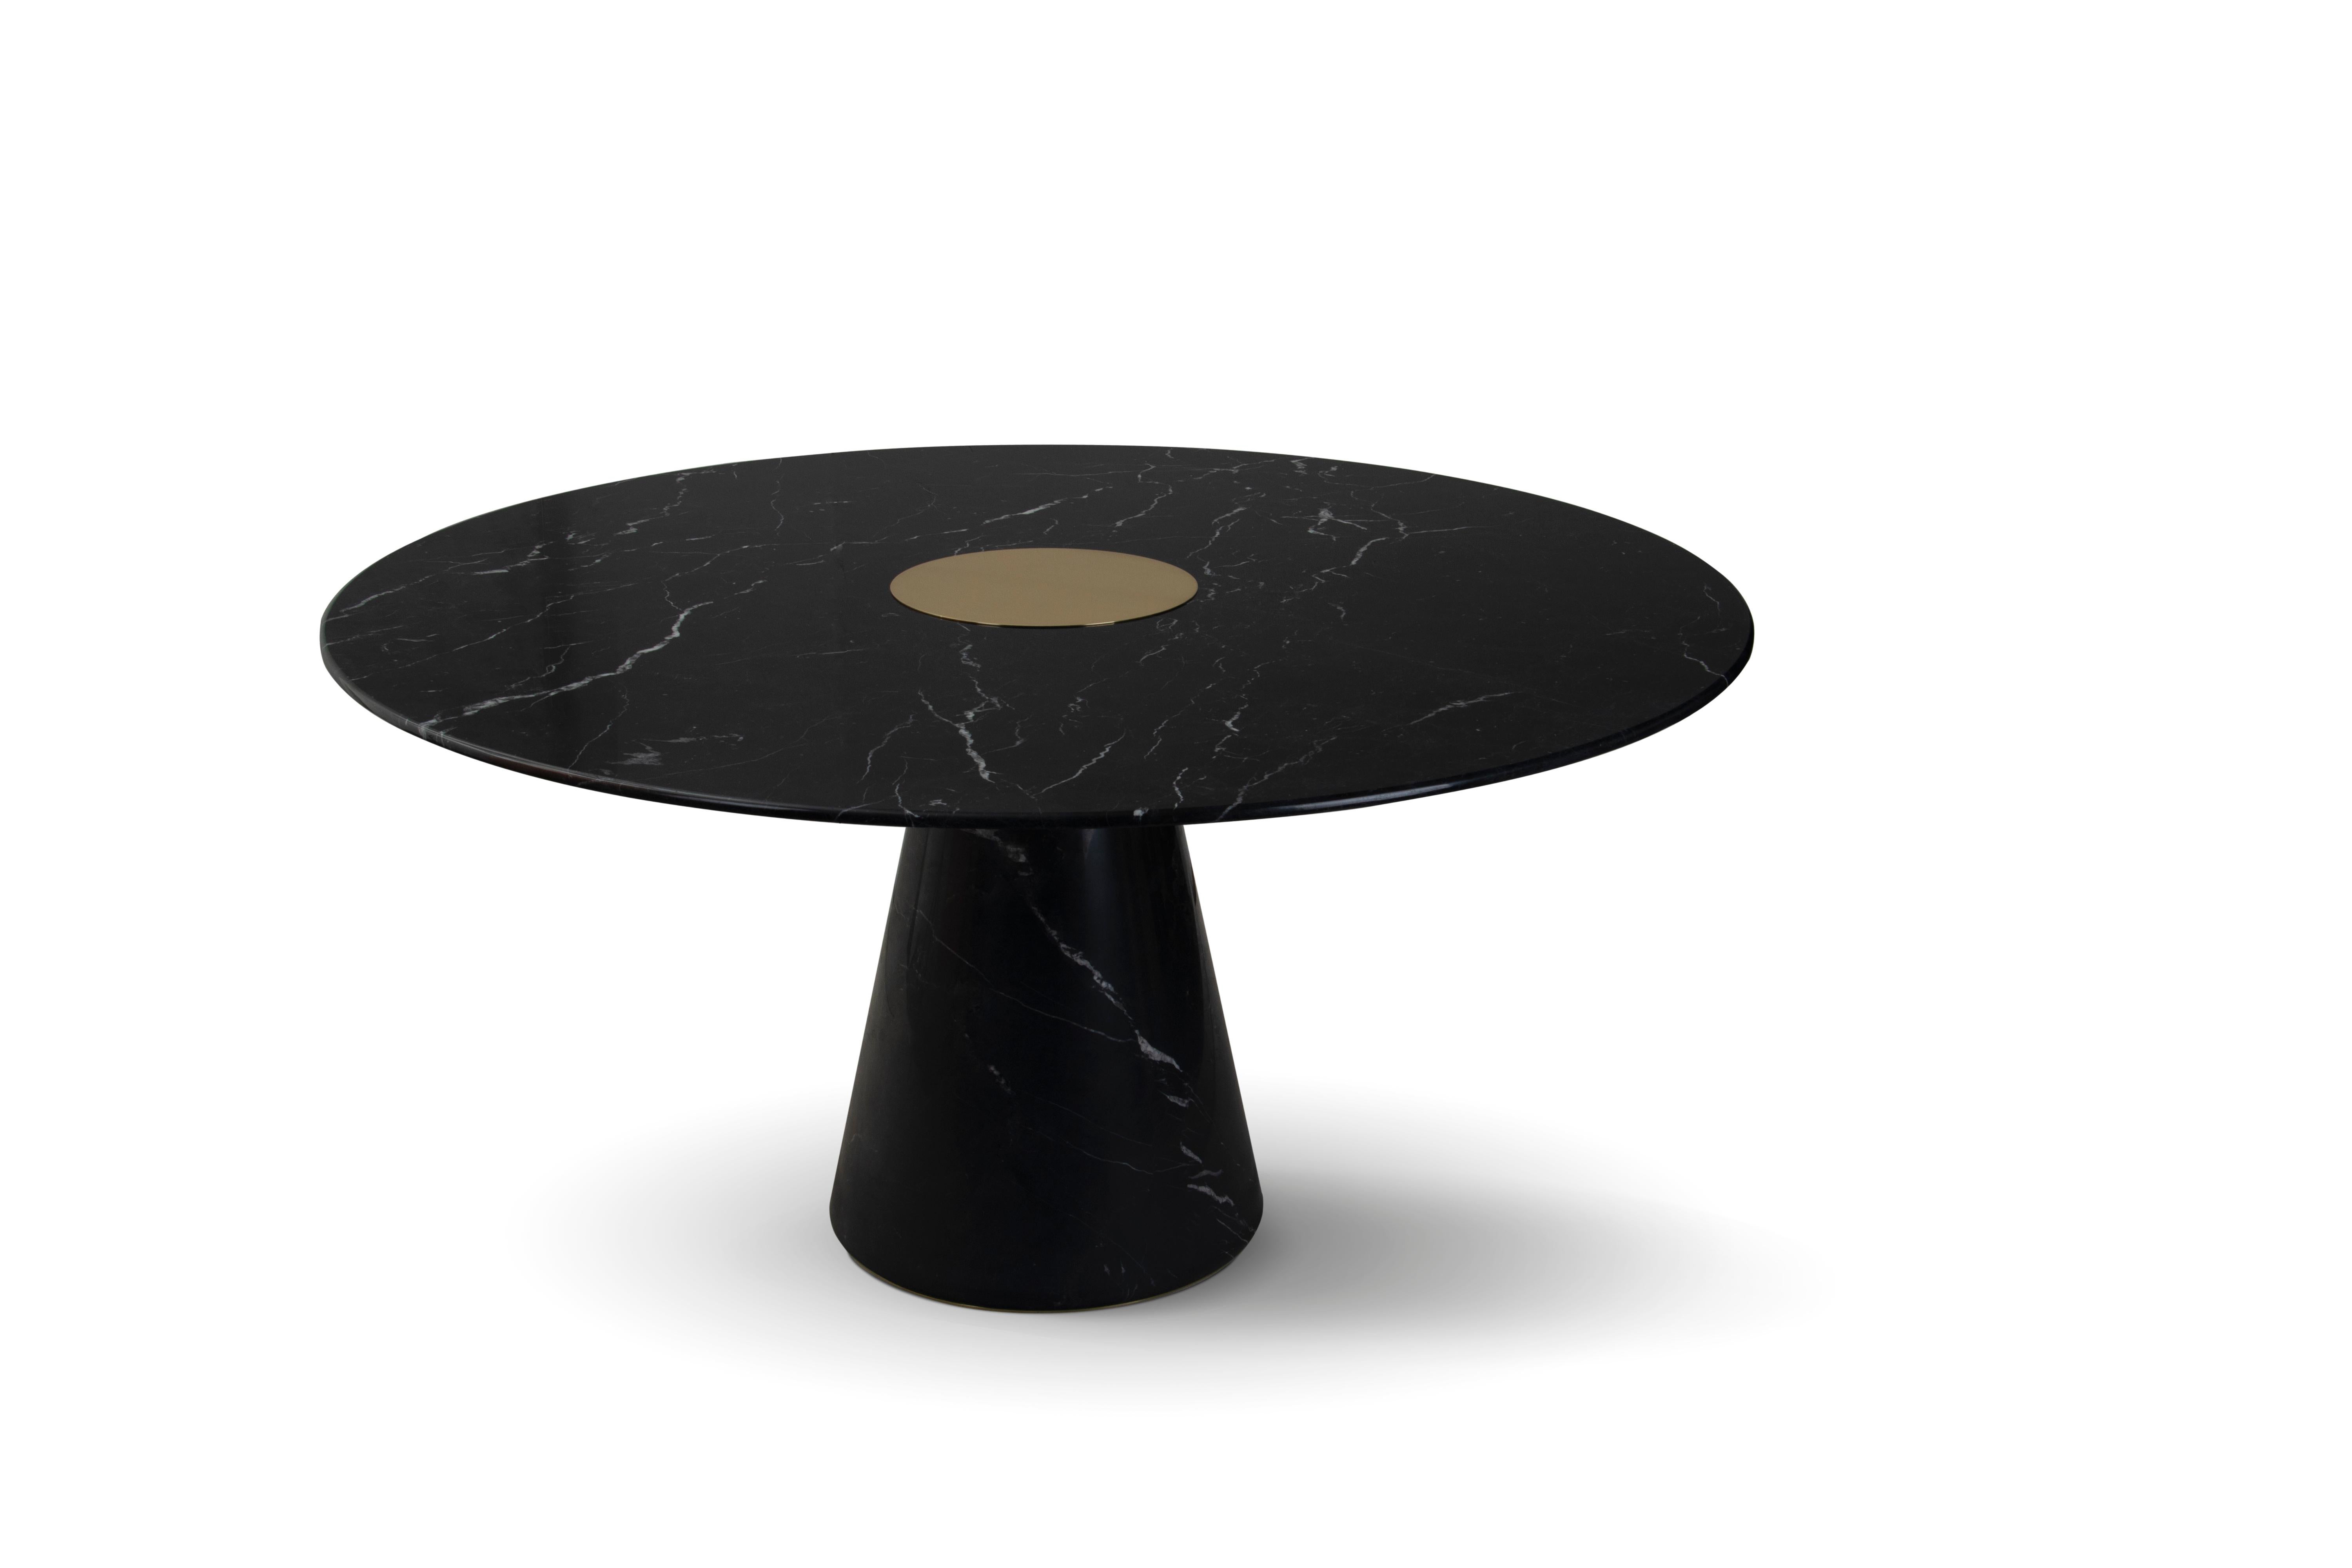 A modern dining table perfect for smaller spaces, with a round shape that is not only trendy but extremely enticing. Designed purely of dark marble, this is a majestic dining table with incredible potential to bring out the best in your dining room